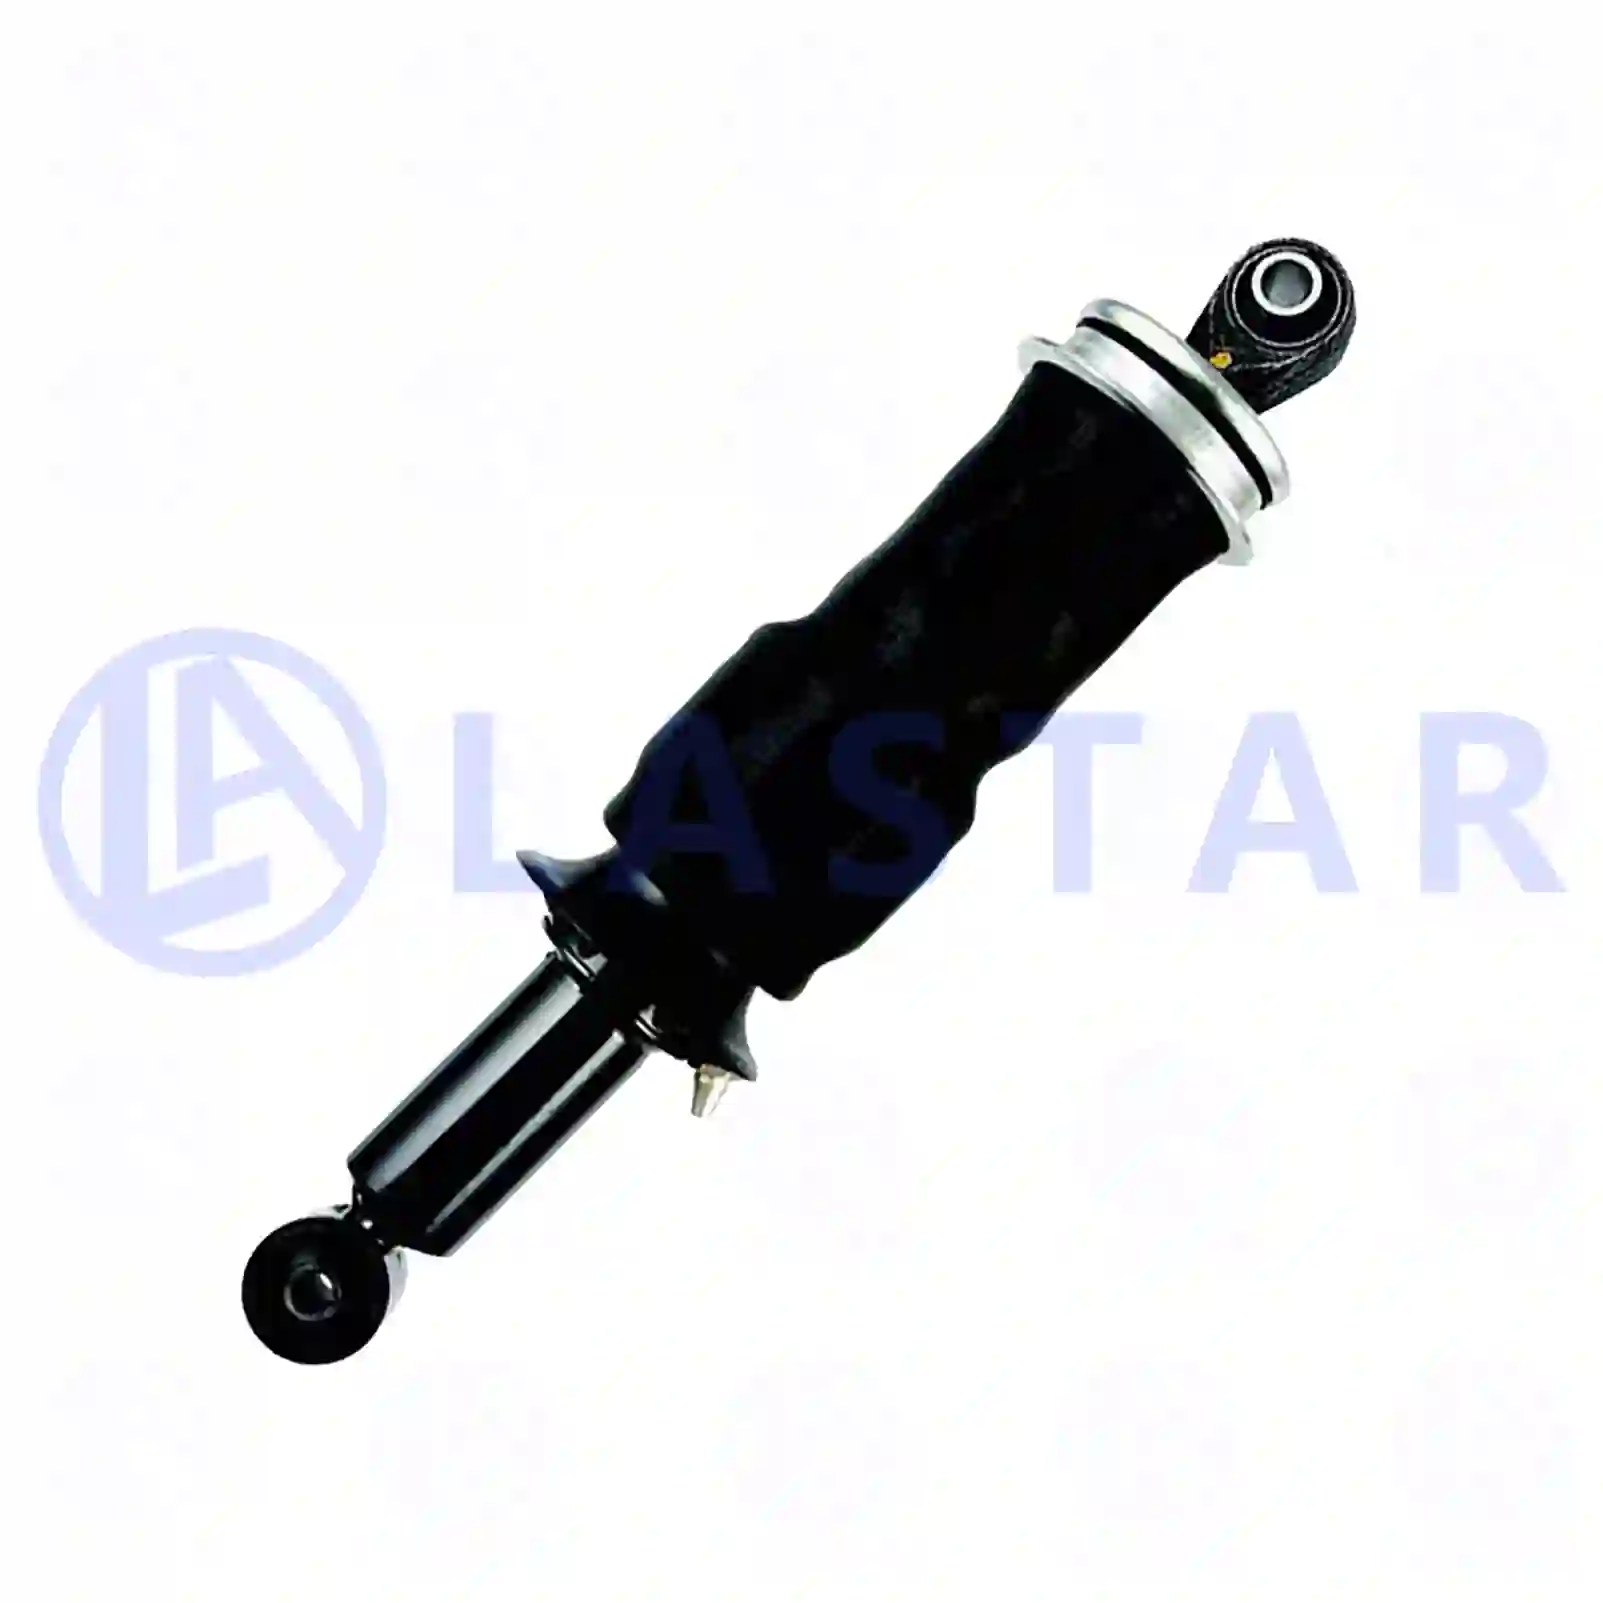 Cabin shock absorber, 77735474, 7421821030, , , ||  77735474 Lastar Spare Part | Truck Spare Parts, Auotomotive Spare Parts Cabin shock absorber, 77735474, 7421821030, , , ||  77735474 Lastar Spare Part | Truck Spare Parts, Auotomotive Spare Parts